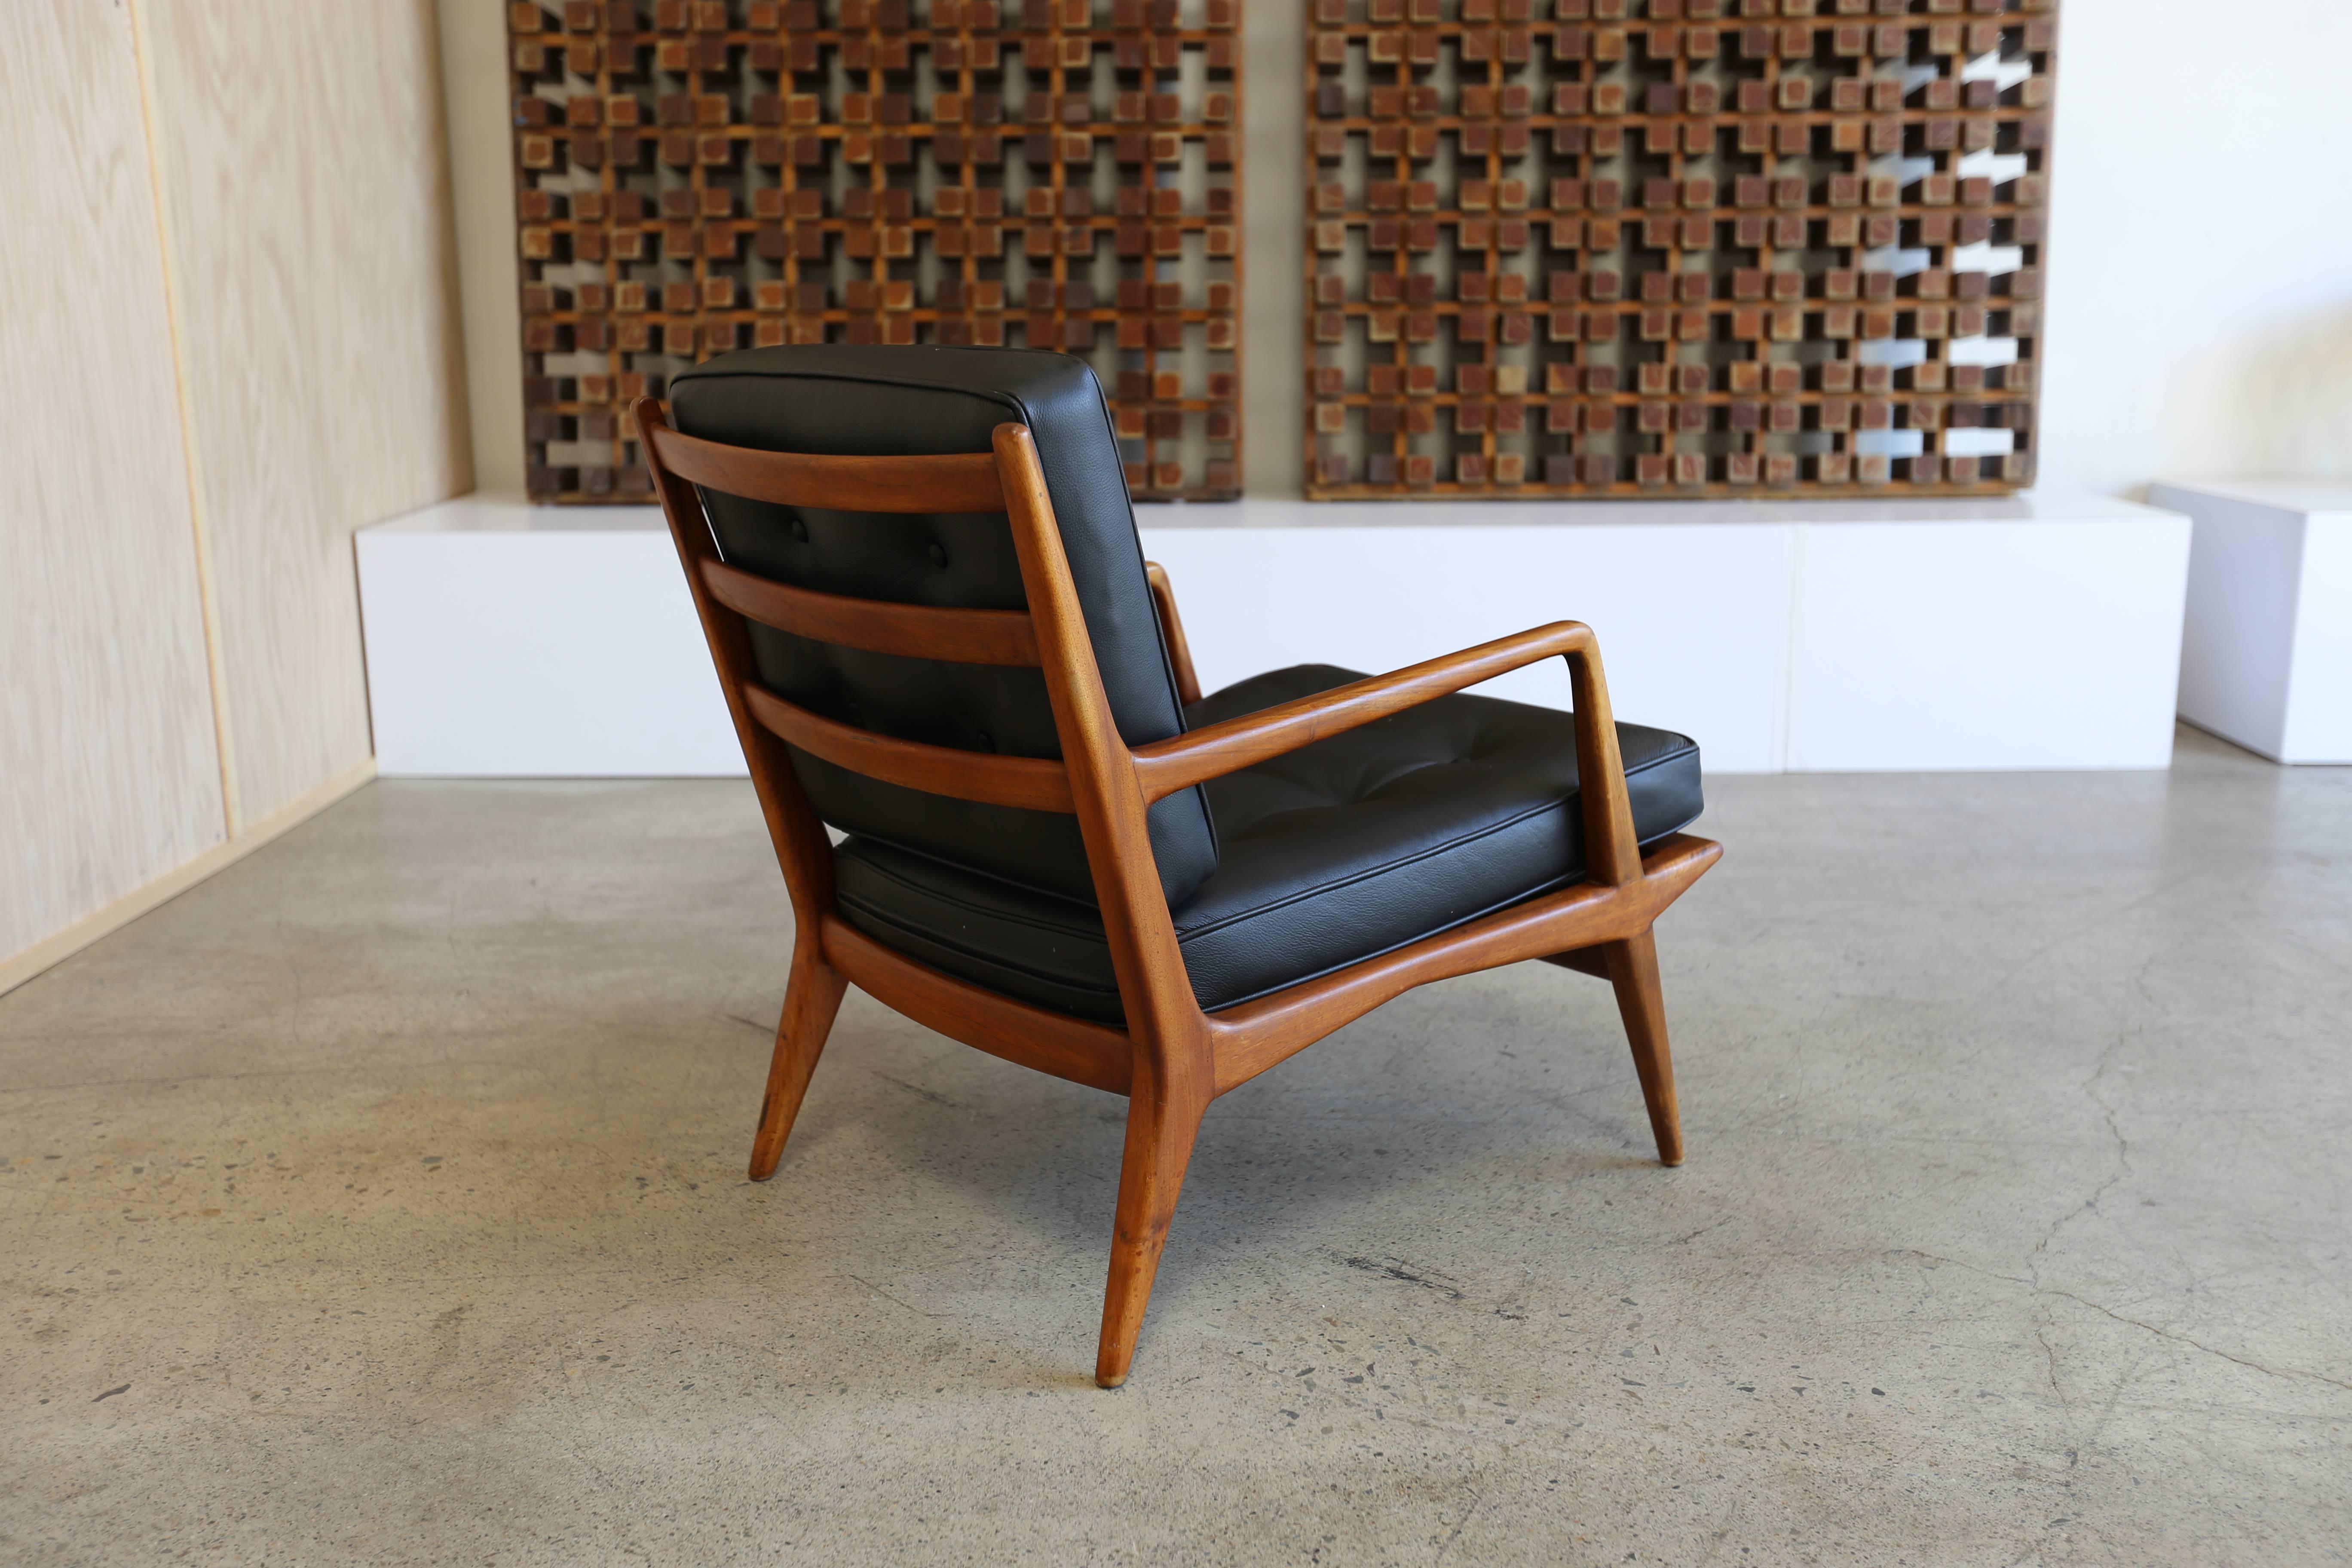 20th Century Carlo di Carli Lounge Chair for M. Singer & Sons, 1950s = MOVING SALE !!!!!